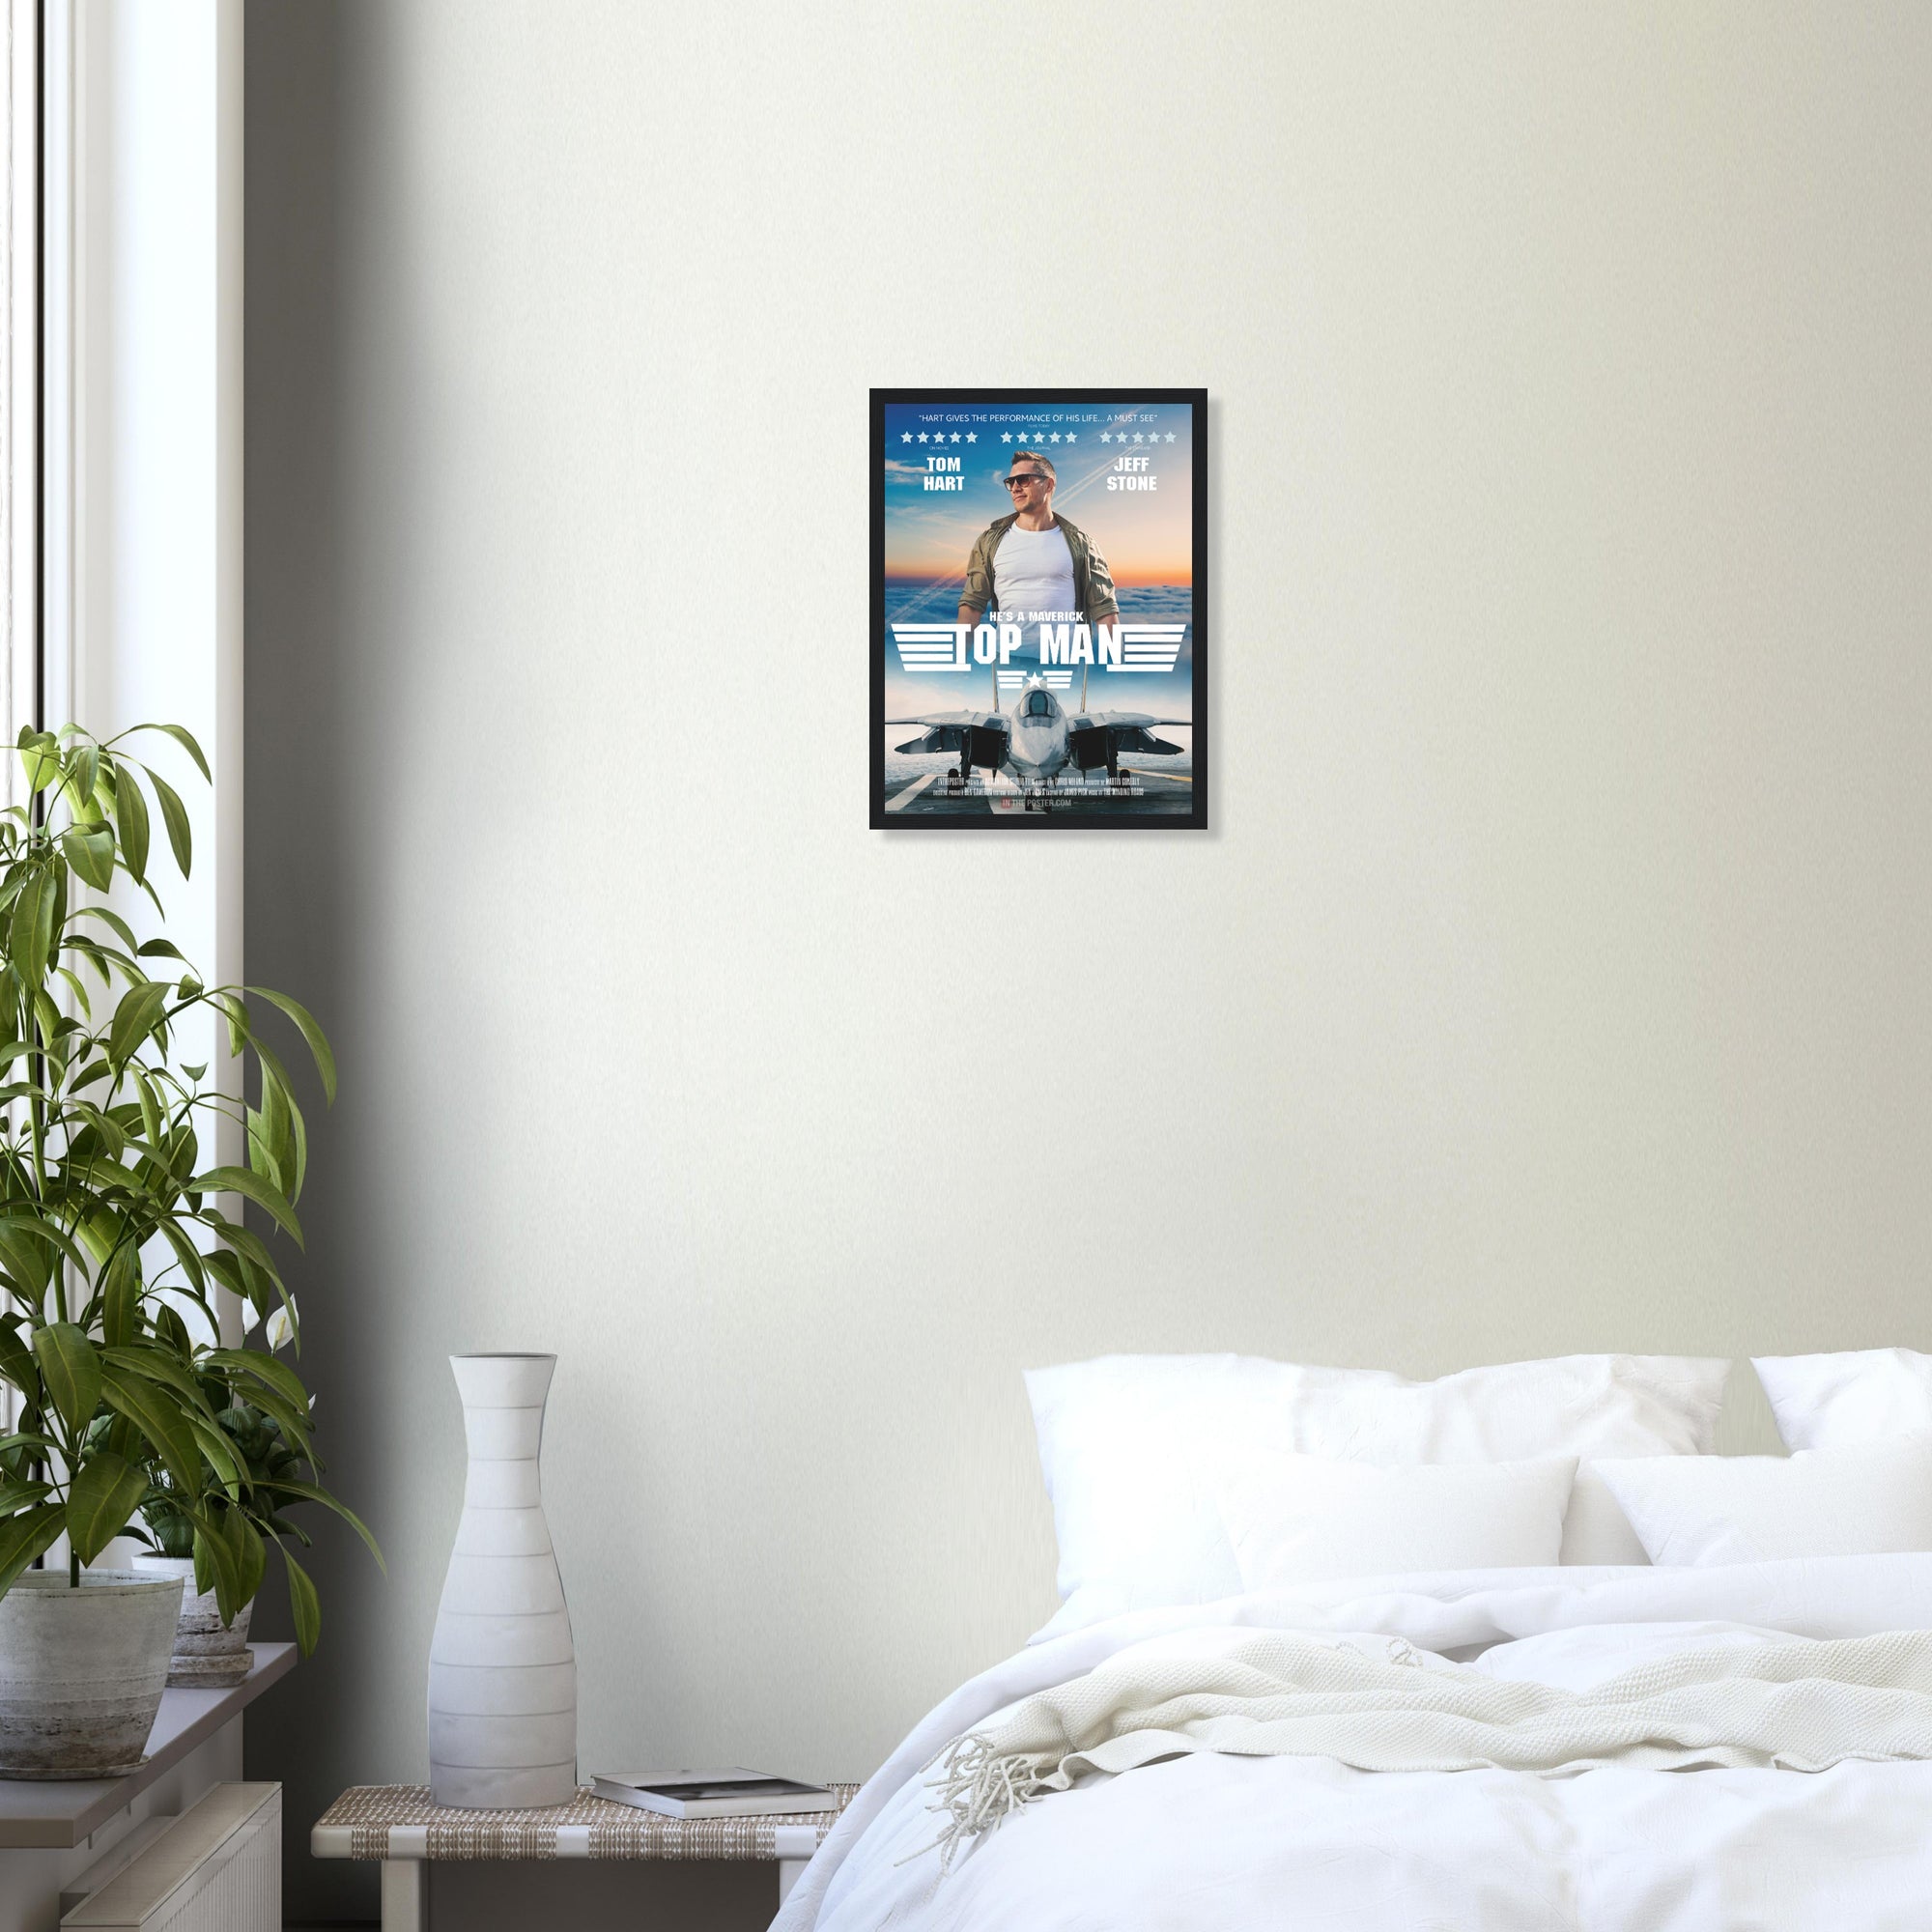 A fighter jet movie poster in small size and a black frame, on a grey wall above a bed and green house plant